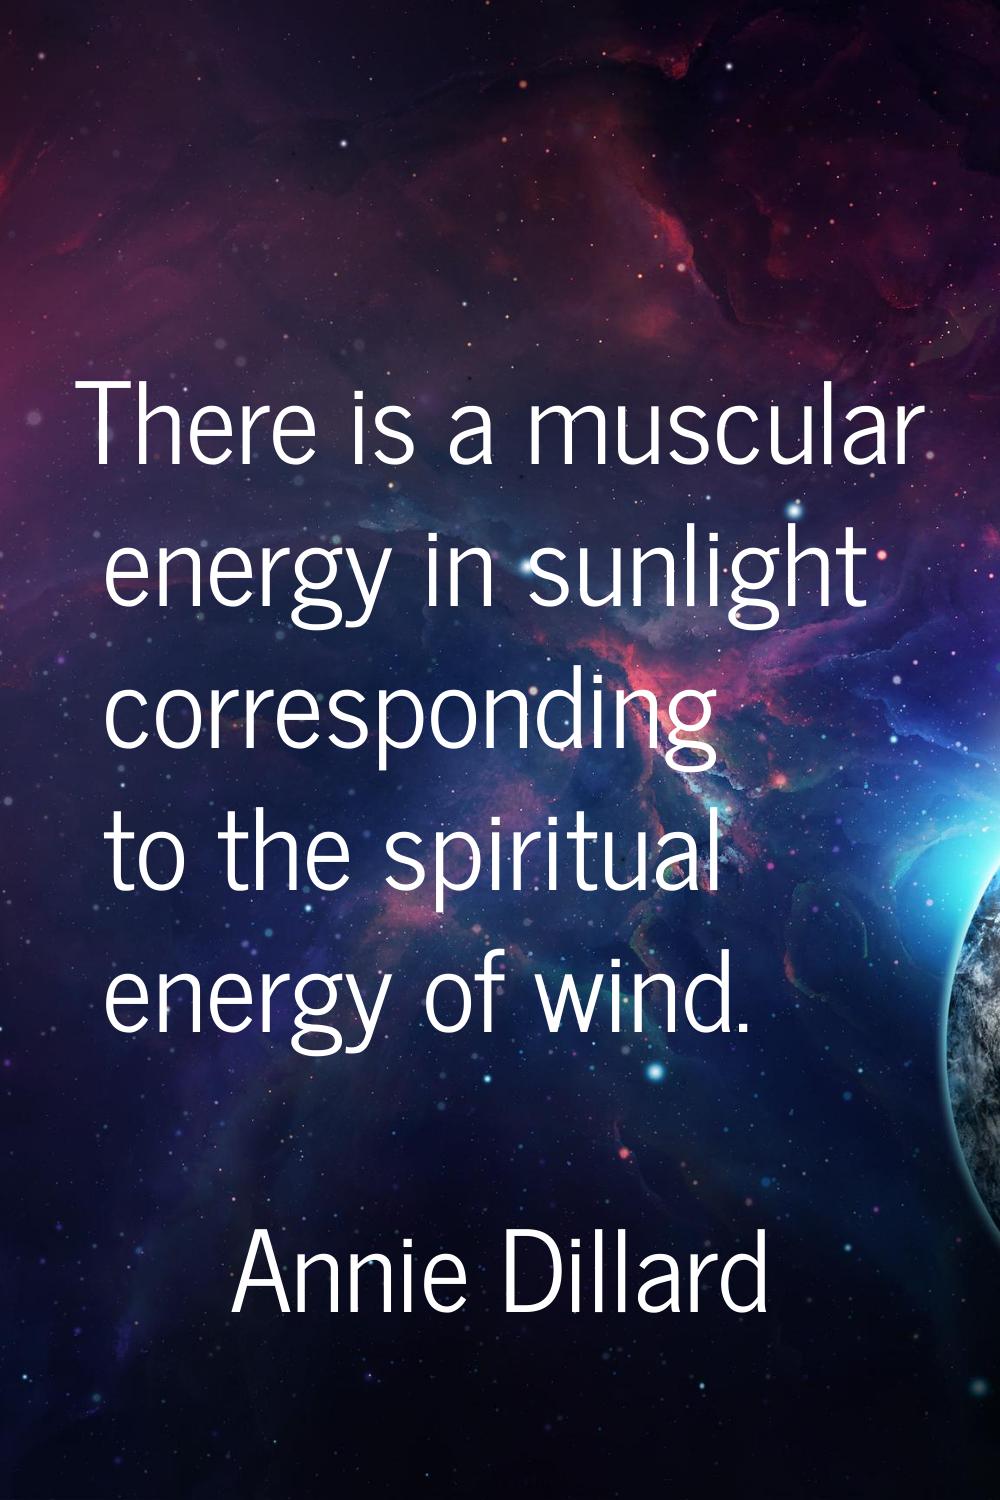 There is a muscular energy in sunlight corresponding to the spiritual energy of wind.